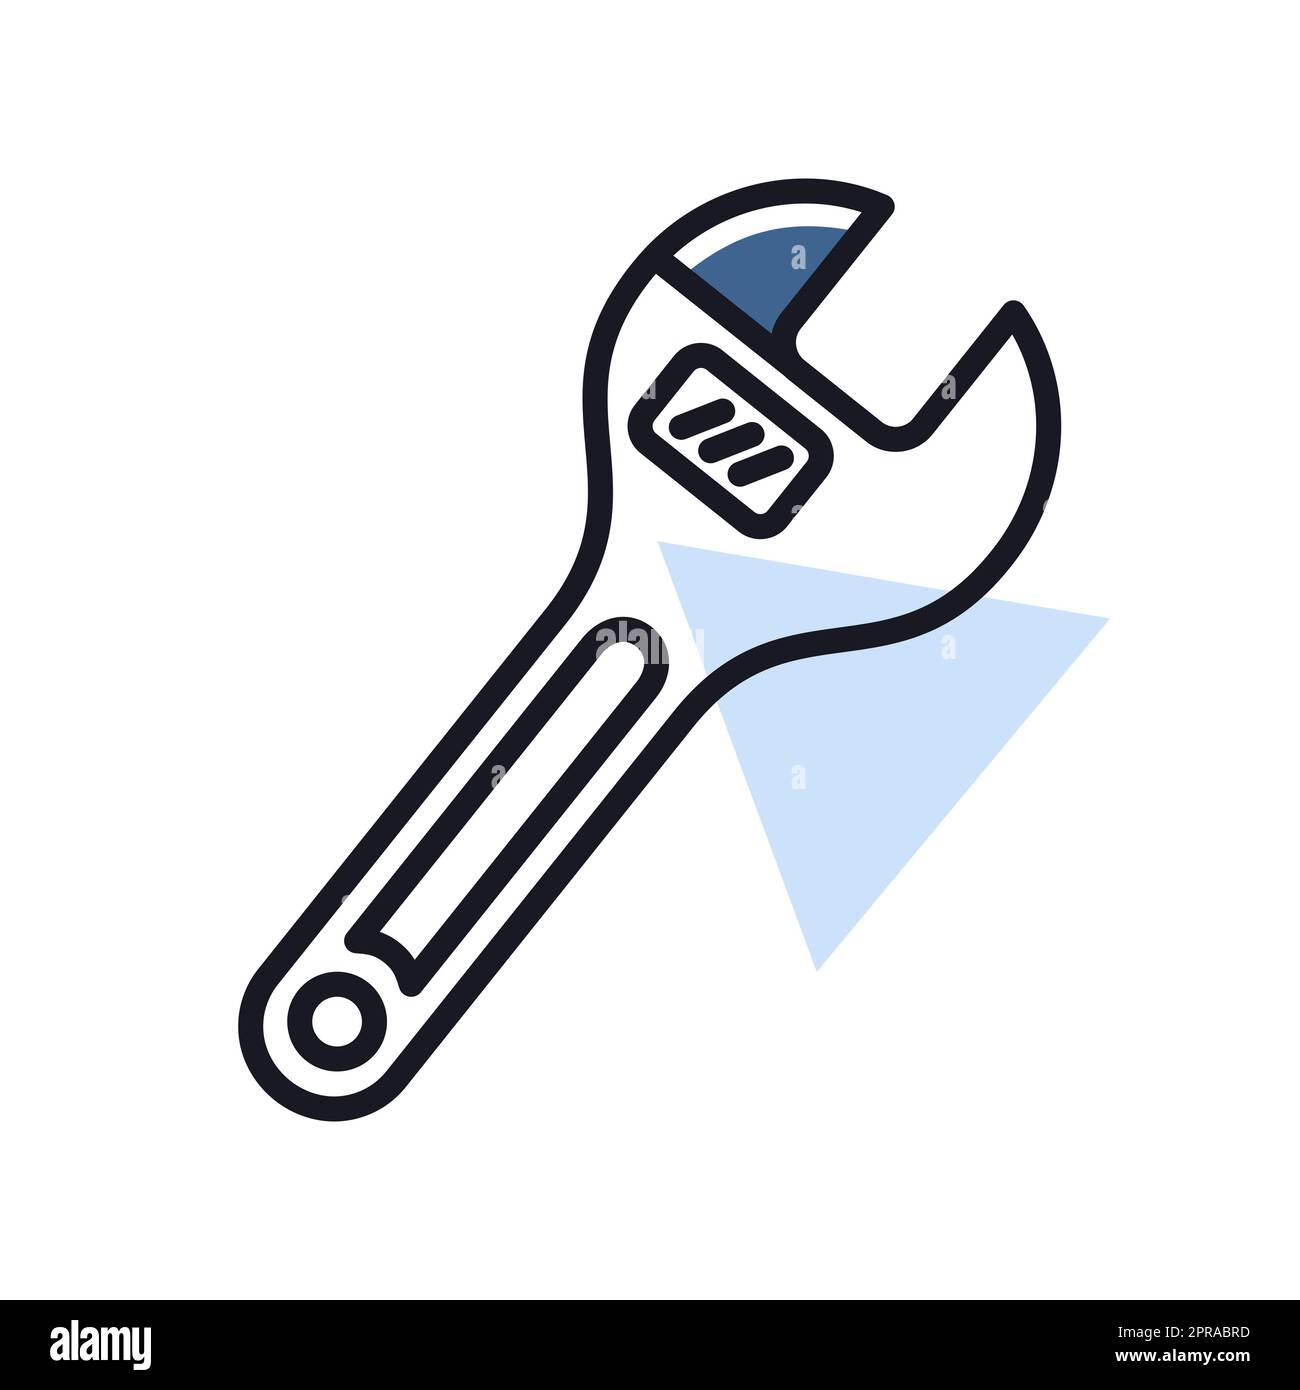 Wrench Tools with Ribbon: A Construction Spanner Logo Design